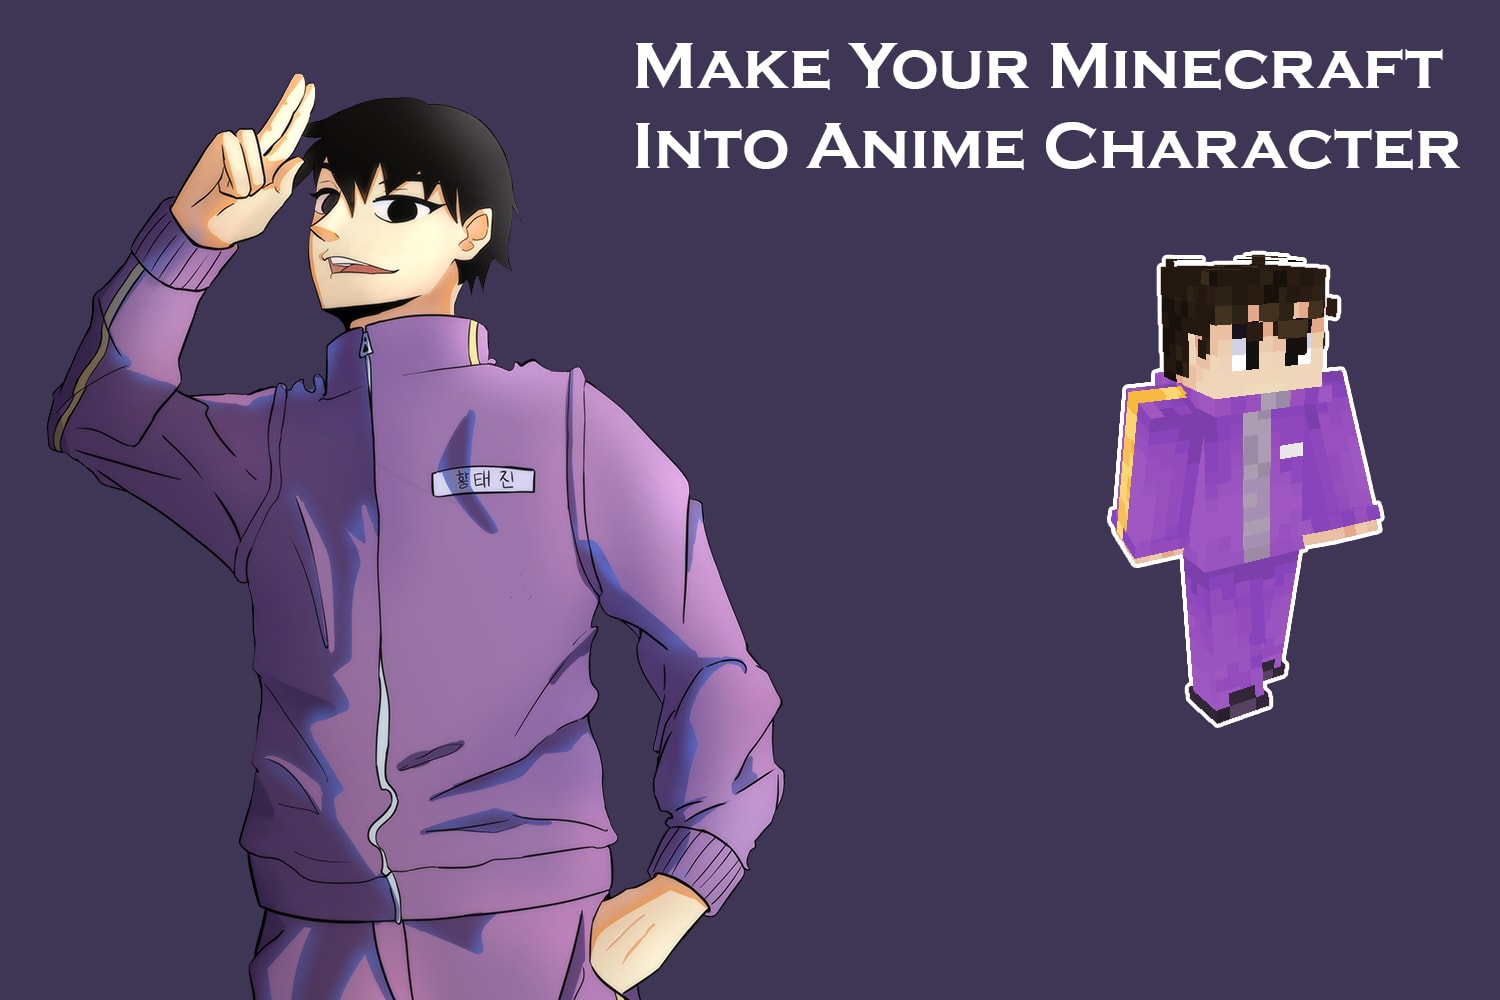 Draw your roblox, mc or any character in my anime artstyle by Notevenakat